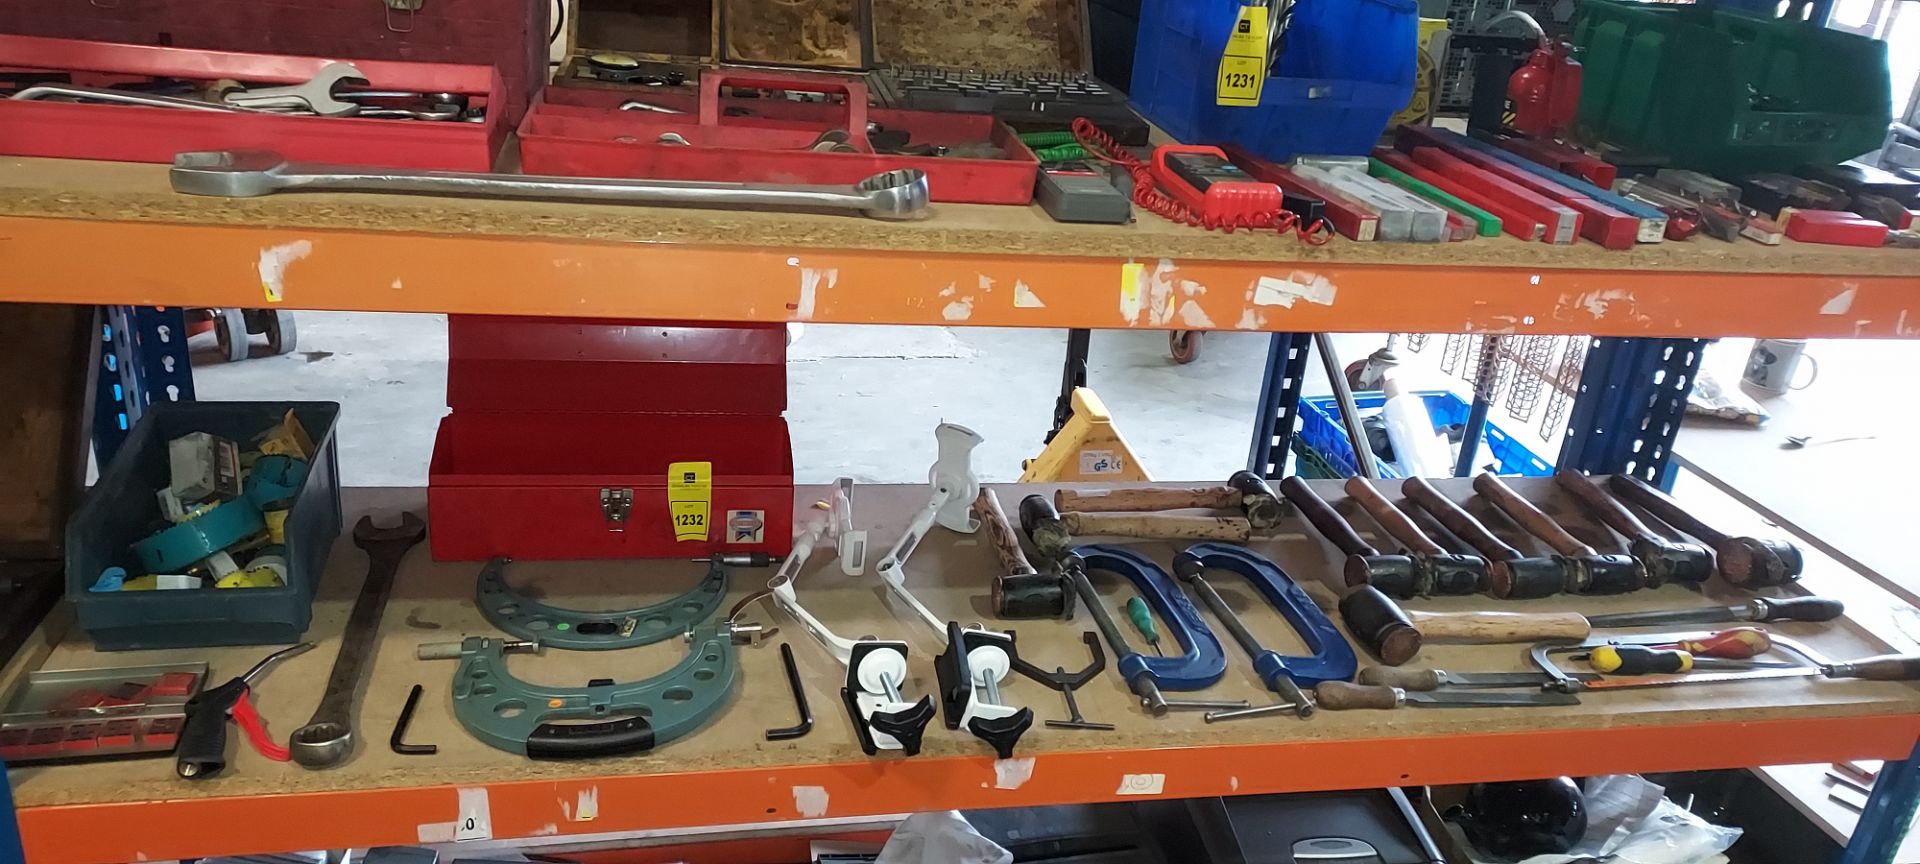 FULL SHELF TOOL LOT CONTAINING COPPER HEAD MALLETS / C CLAMPS / MICROMETERS / VARIOUS CIRCULAR